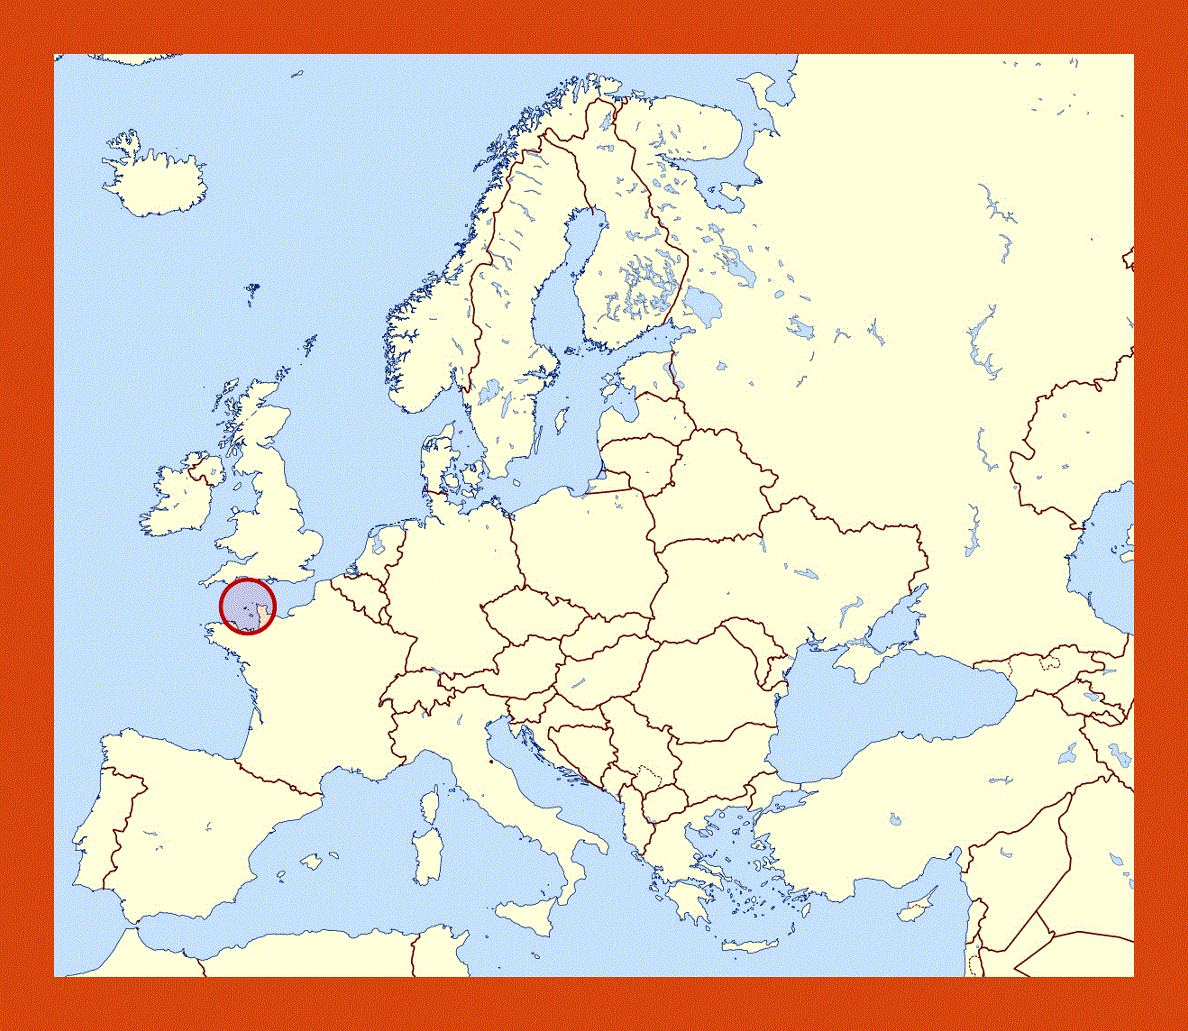 Location map of Guernsey in Europe